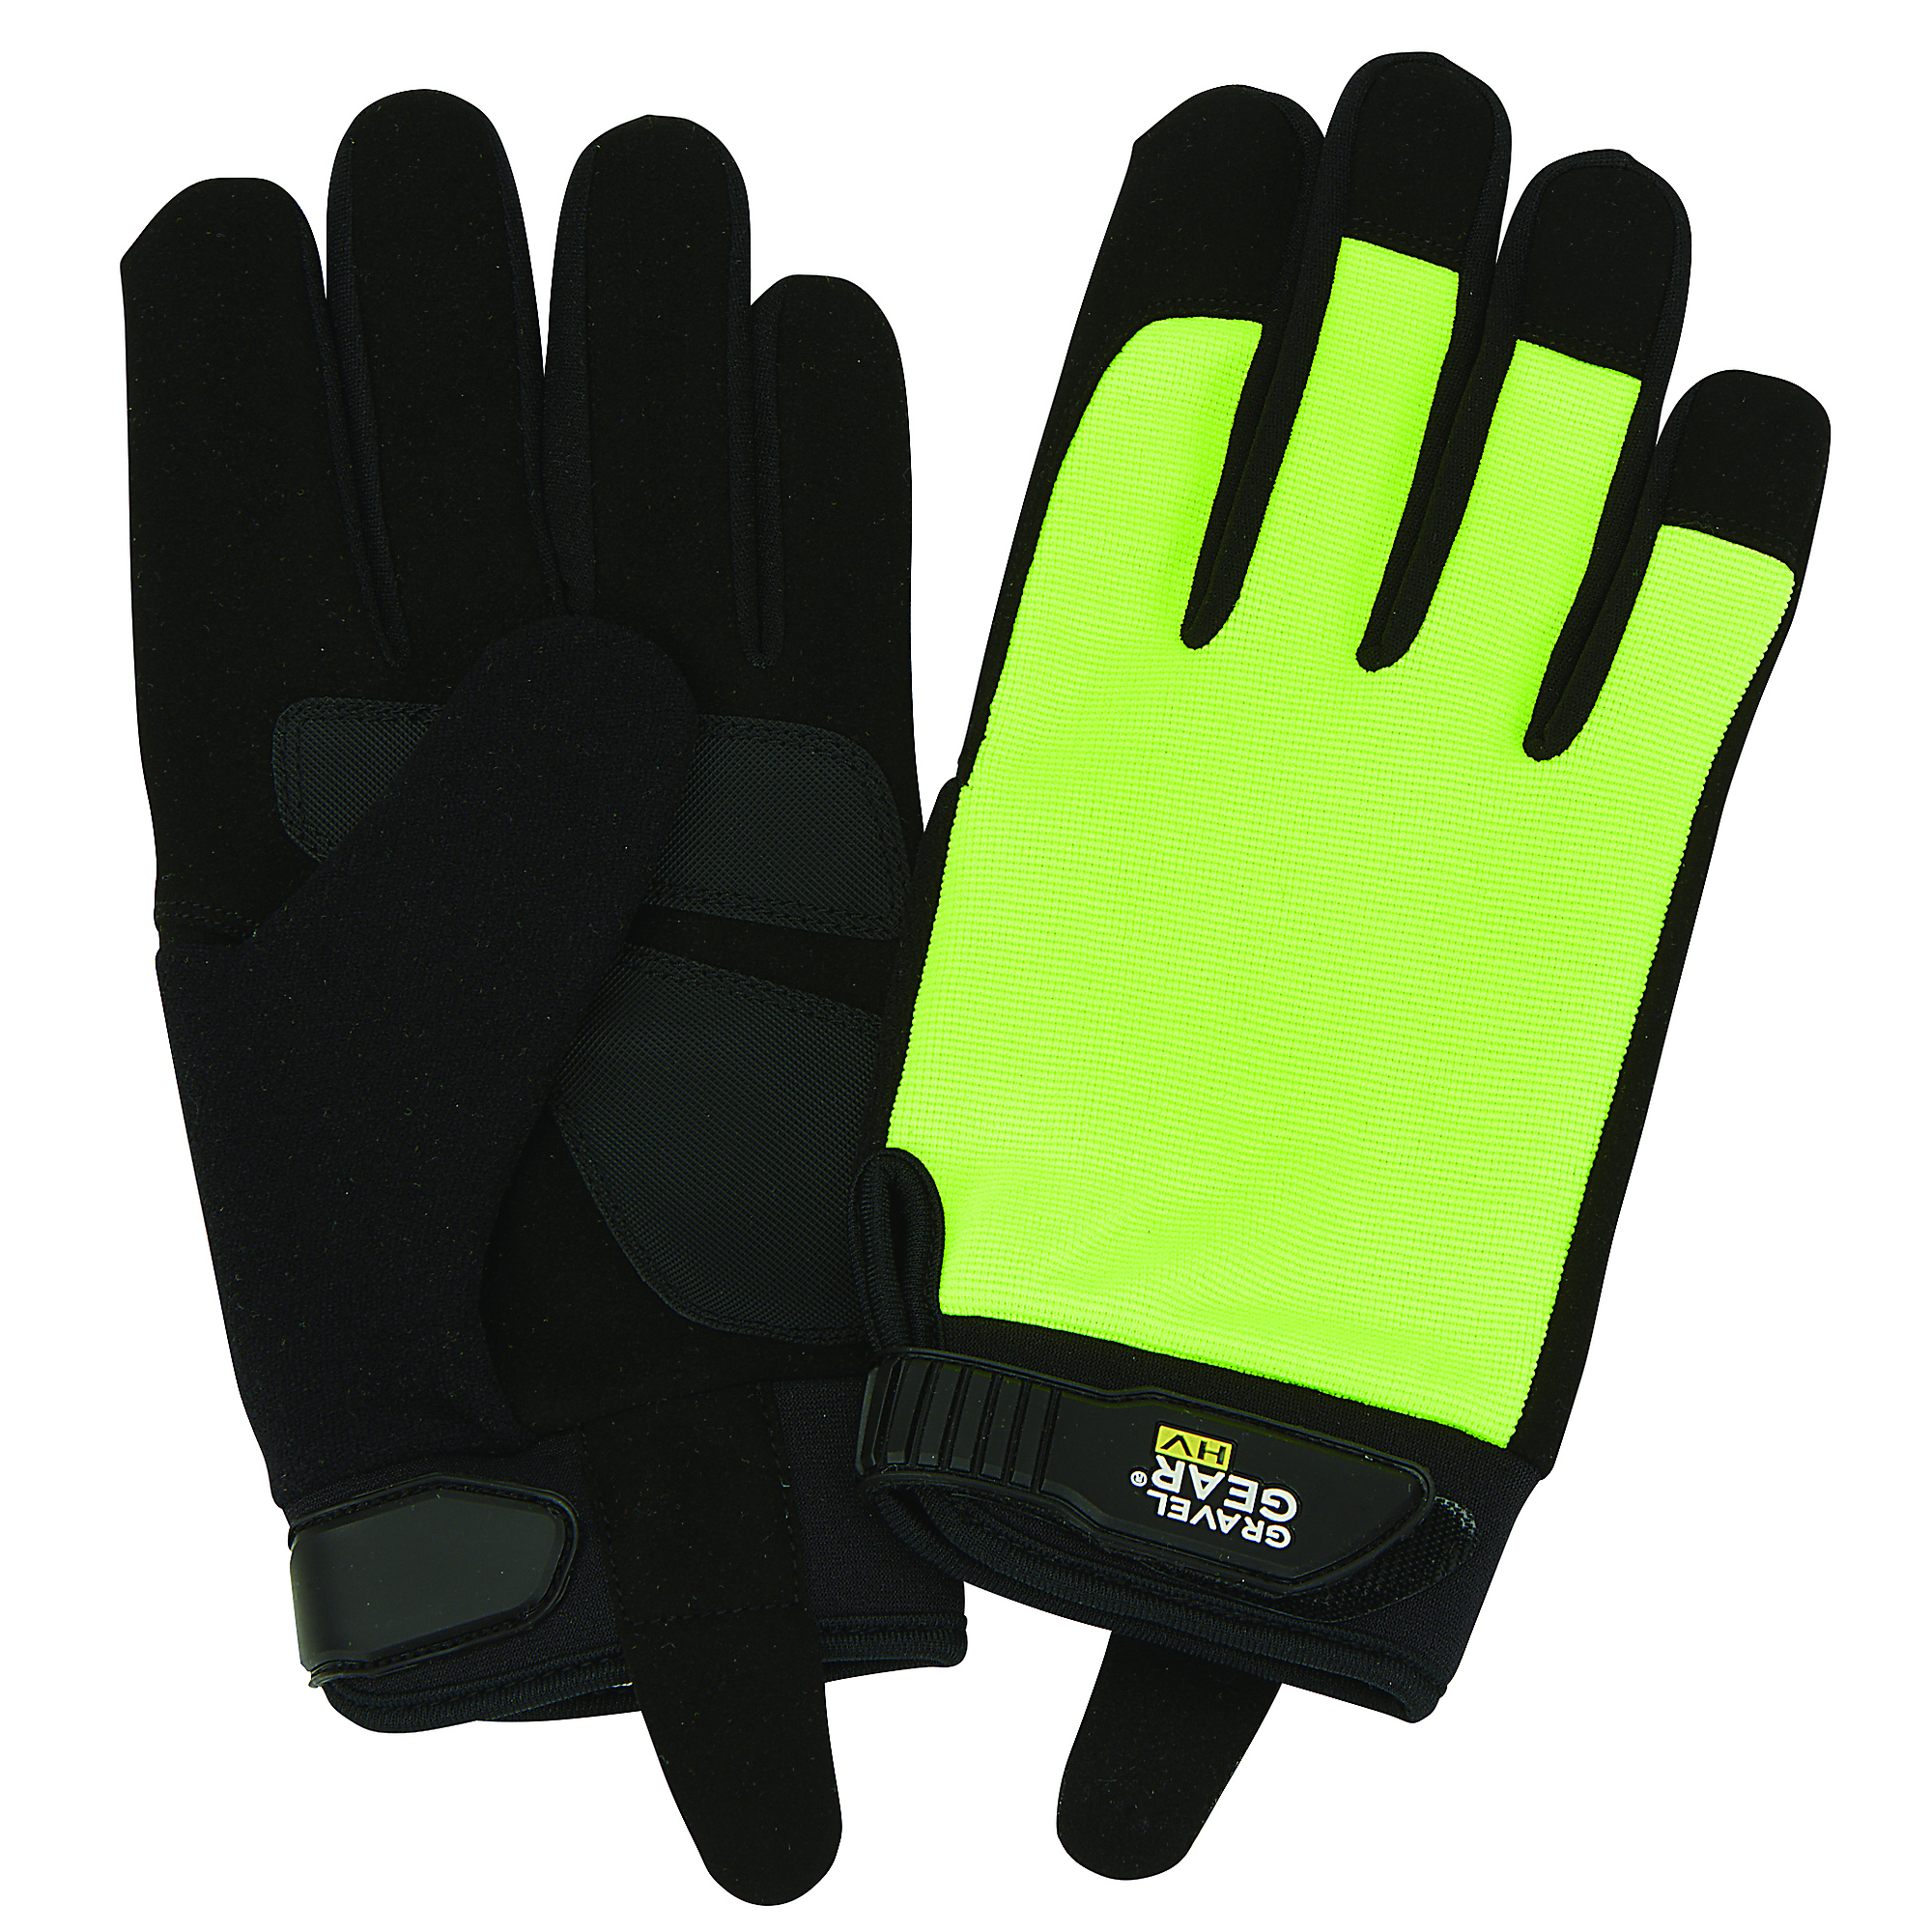 Gravel Gear Men's High-Visibility Utility Gloves, 1 Pair, Lime, Large, Model 9012-A